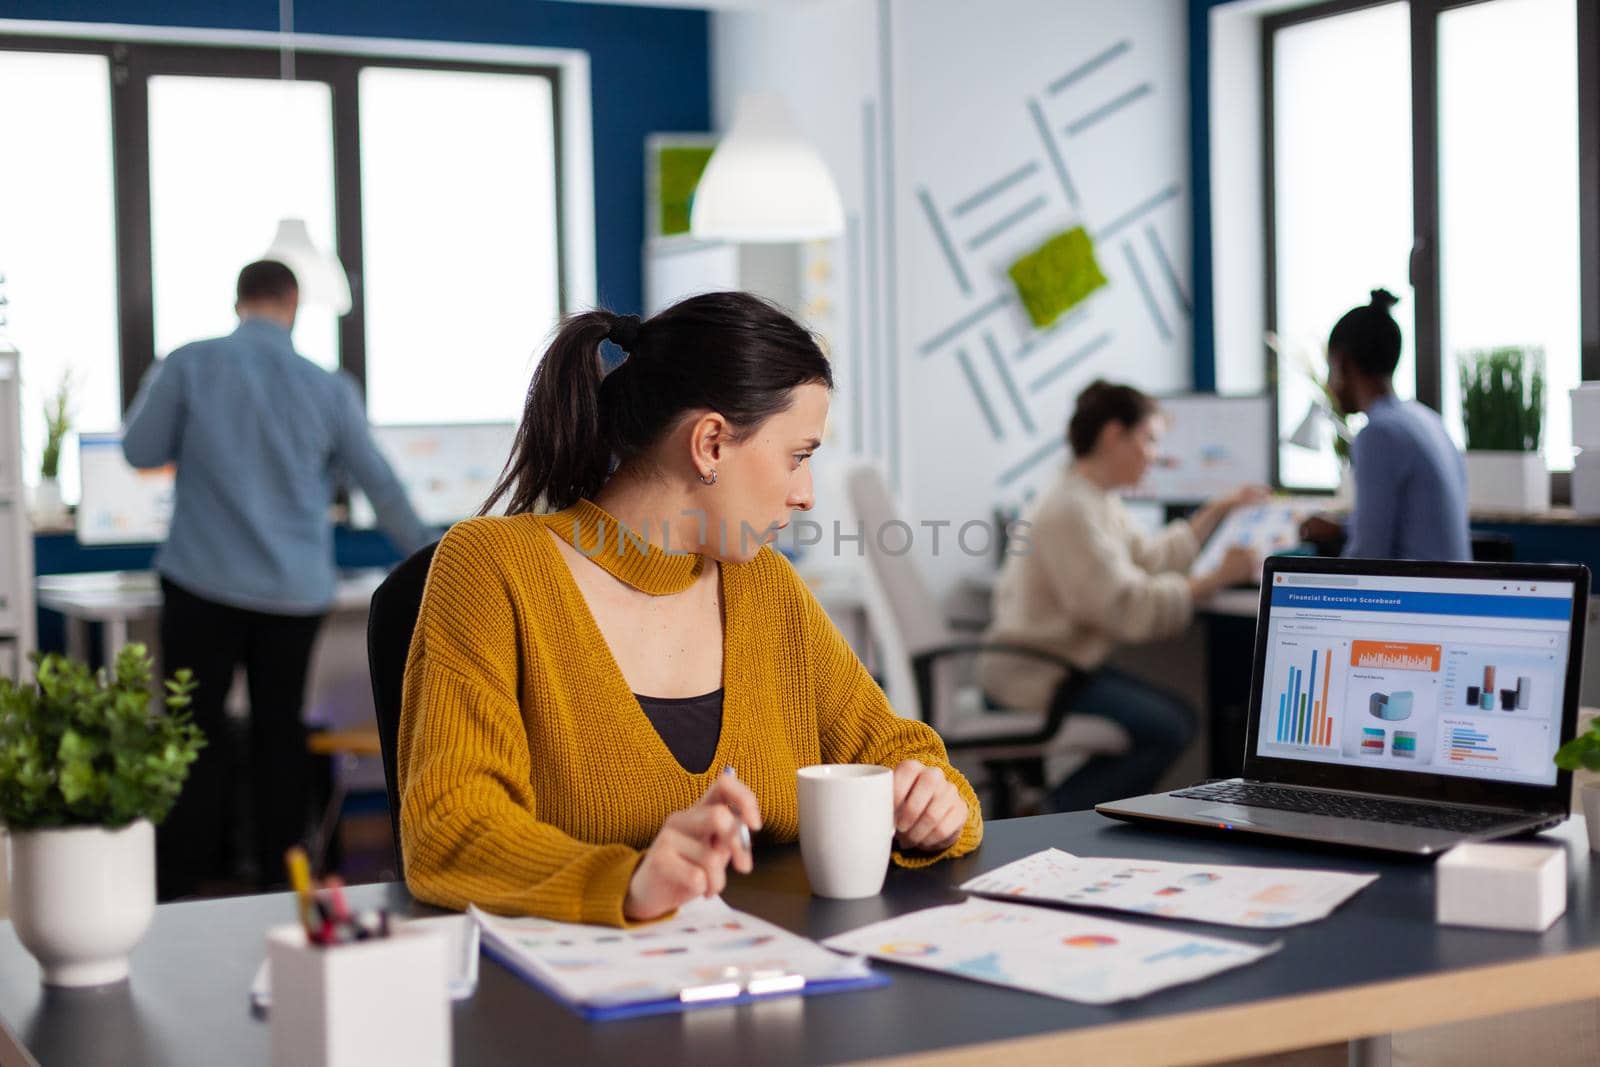 Businesswoman sitting at desk in office analyzing charts on laptop screen. Executive entrepreneur, manager leader sitting working on projects with diverse teamworkers.